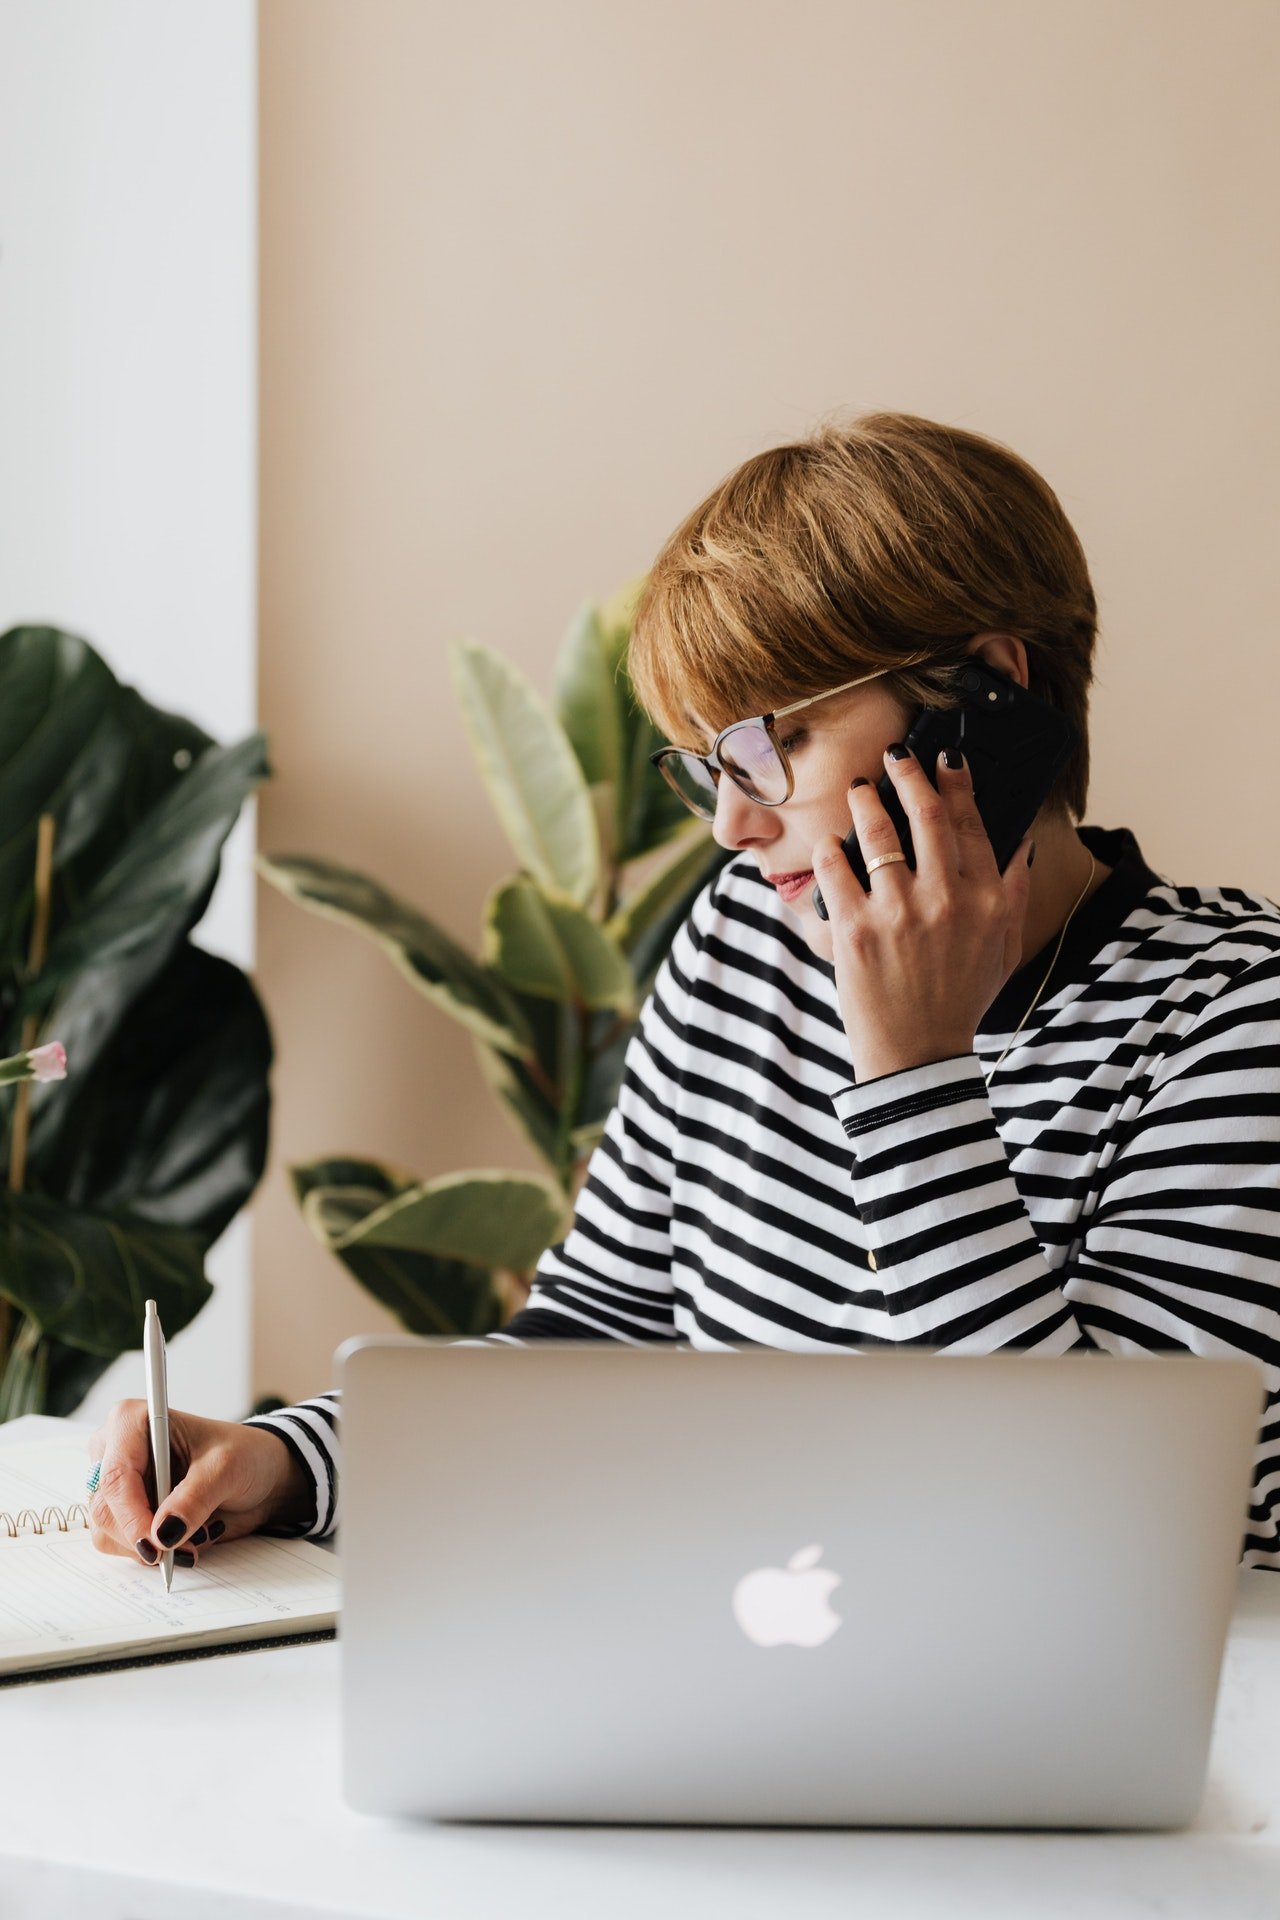 Ruth called her mother to see how she was doing and discovered what Allan did. | Source: Pexels